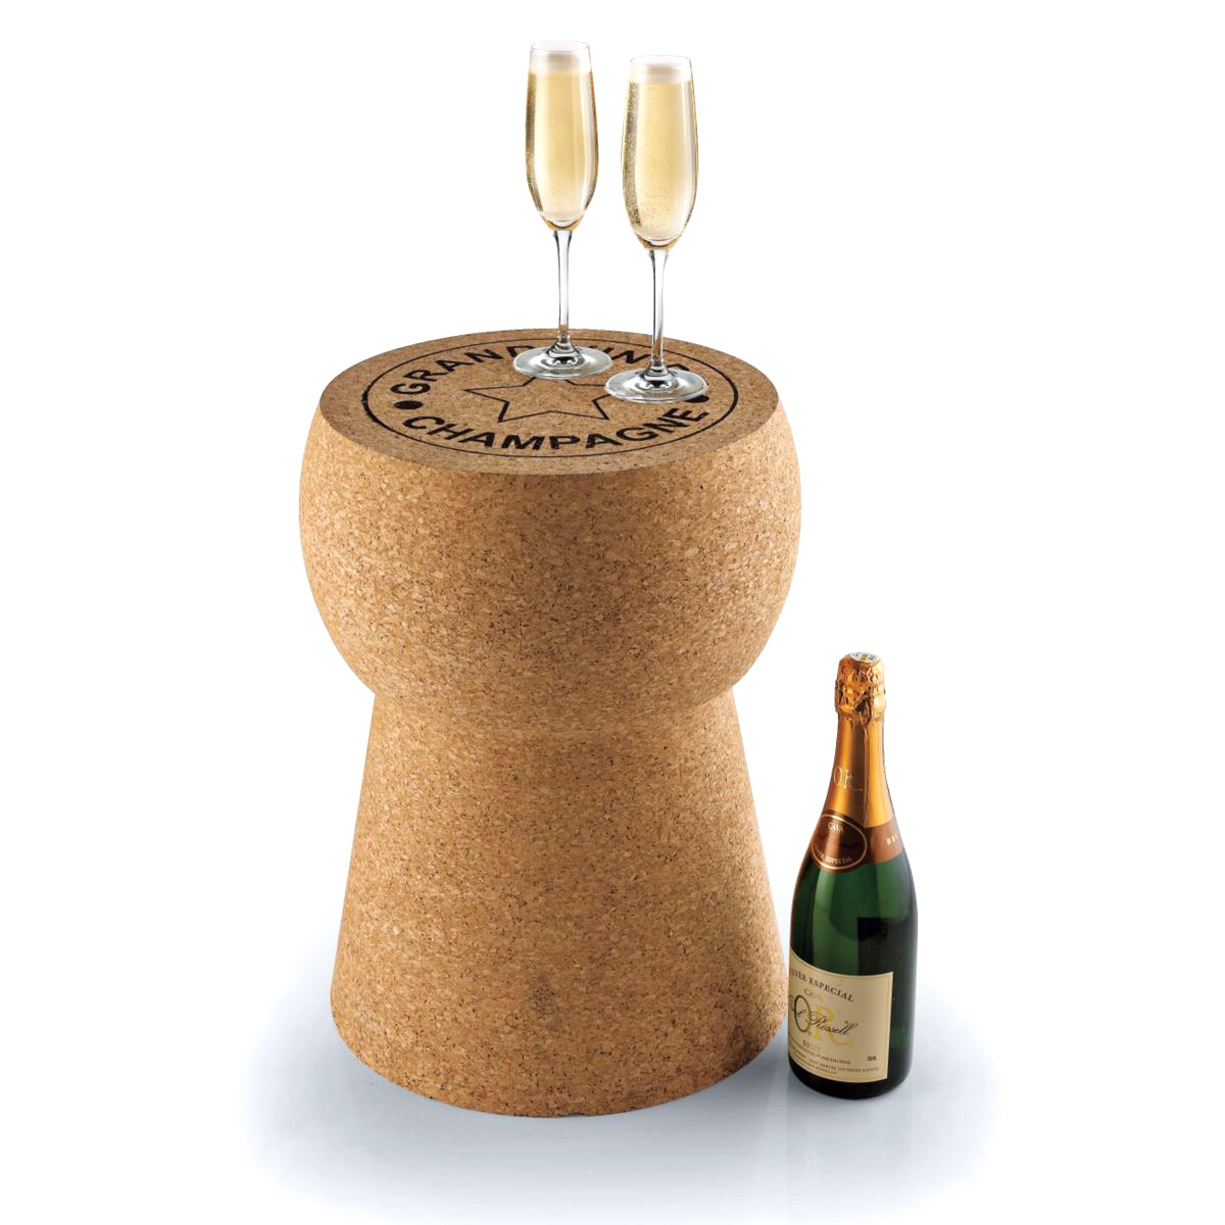 Decorative Piece Fits in Any Space. Round Body /& Flat Top Made of Compressed Cork XL Cork Stool Bar Table or Chair